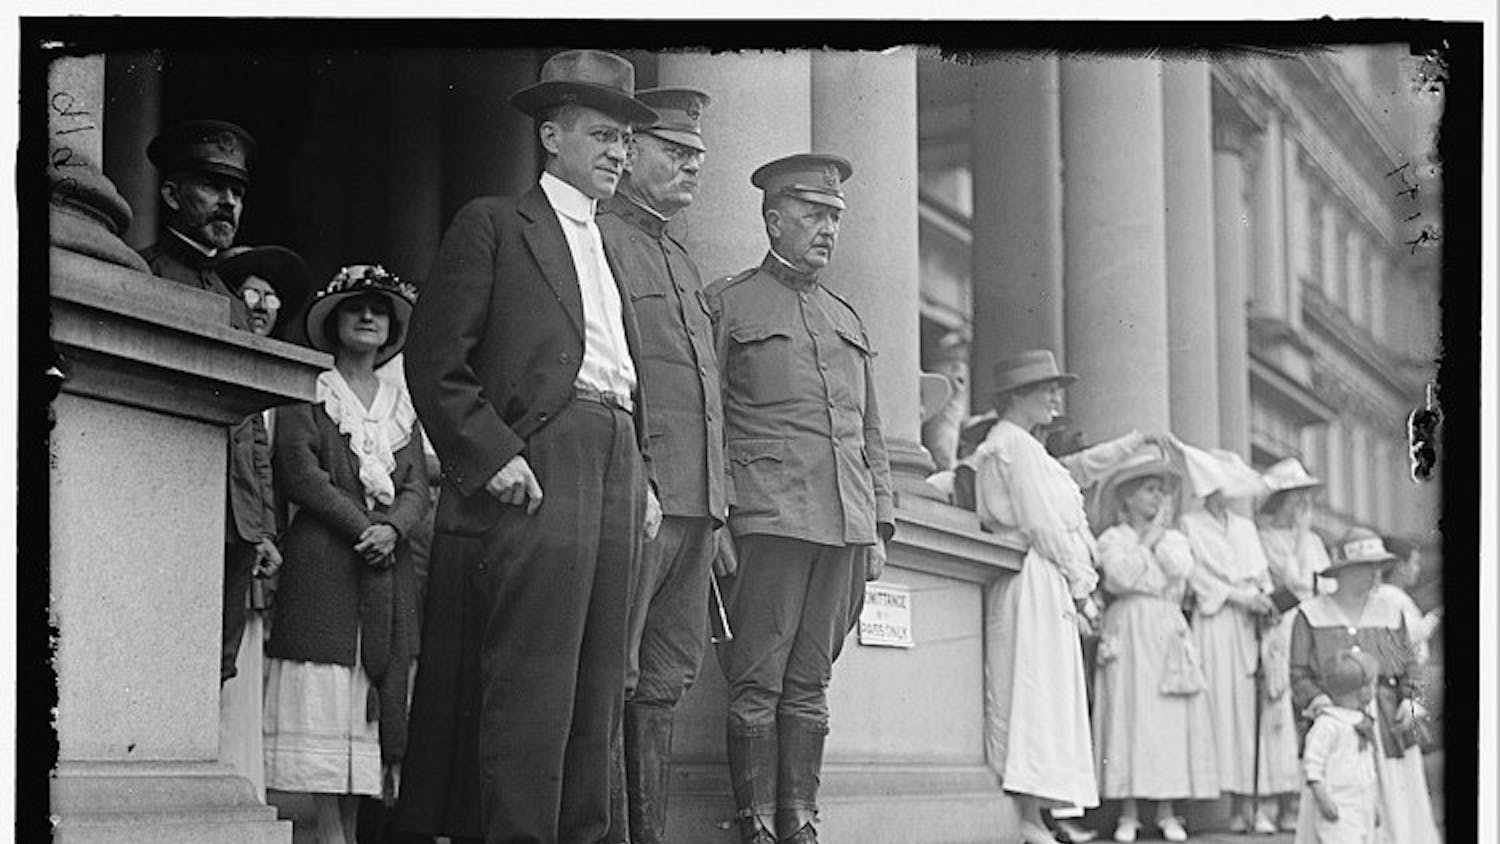 AU STEPS UP â€” Secretary of War Newton D. Baker, center left, and General Tasker H. Bliss, center, greet incoming students at a convocation ceremony.